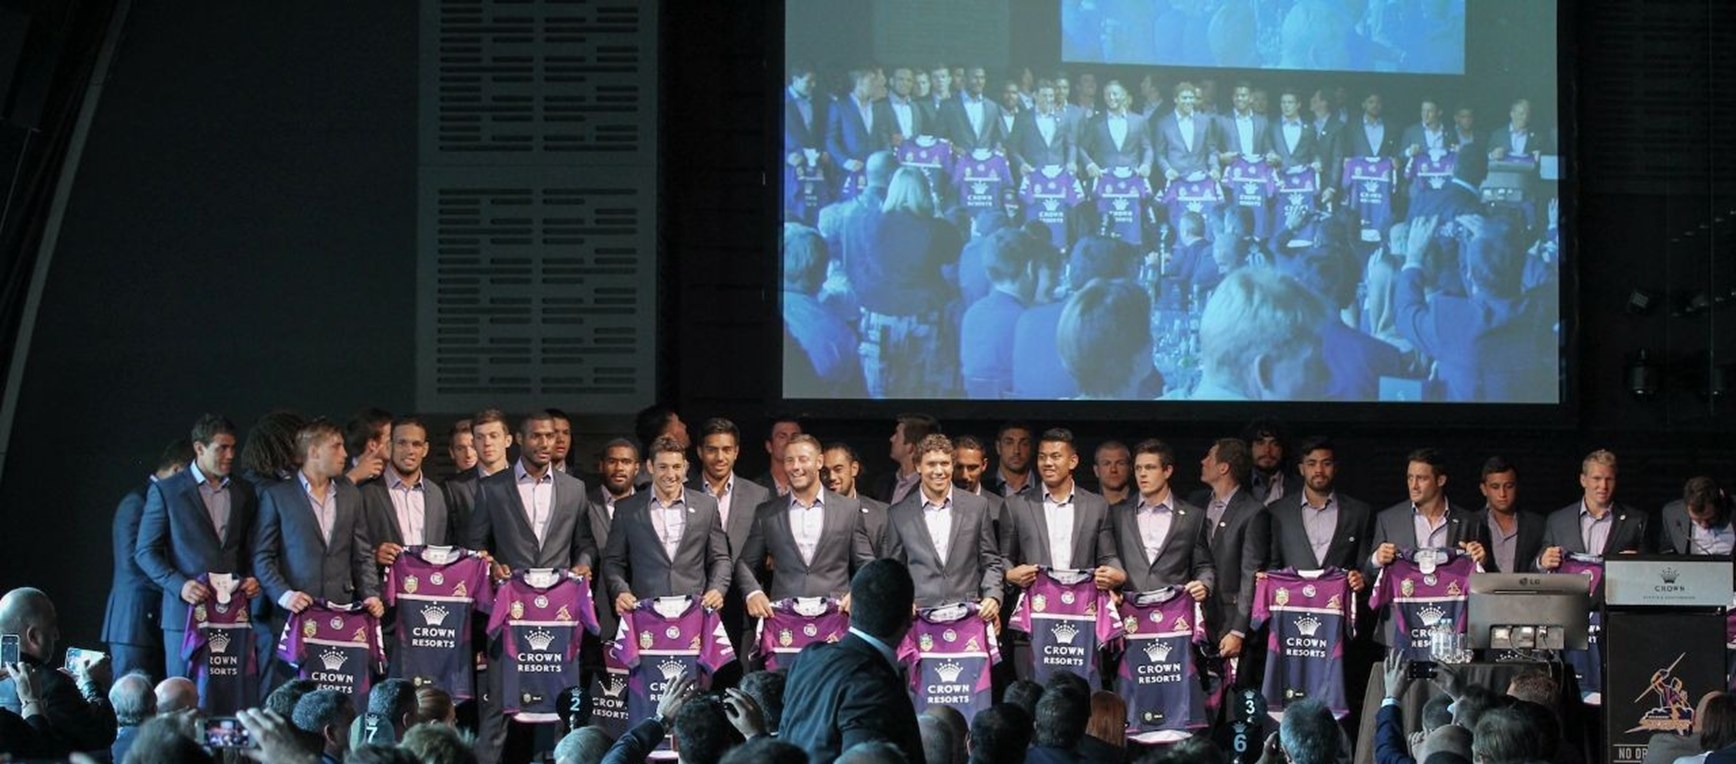 In pictures: 2015 Season Launch